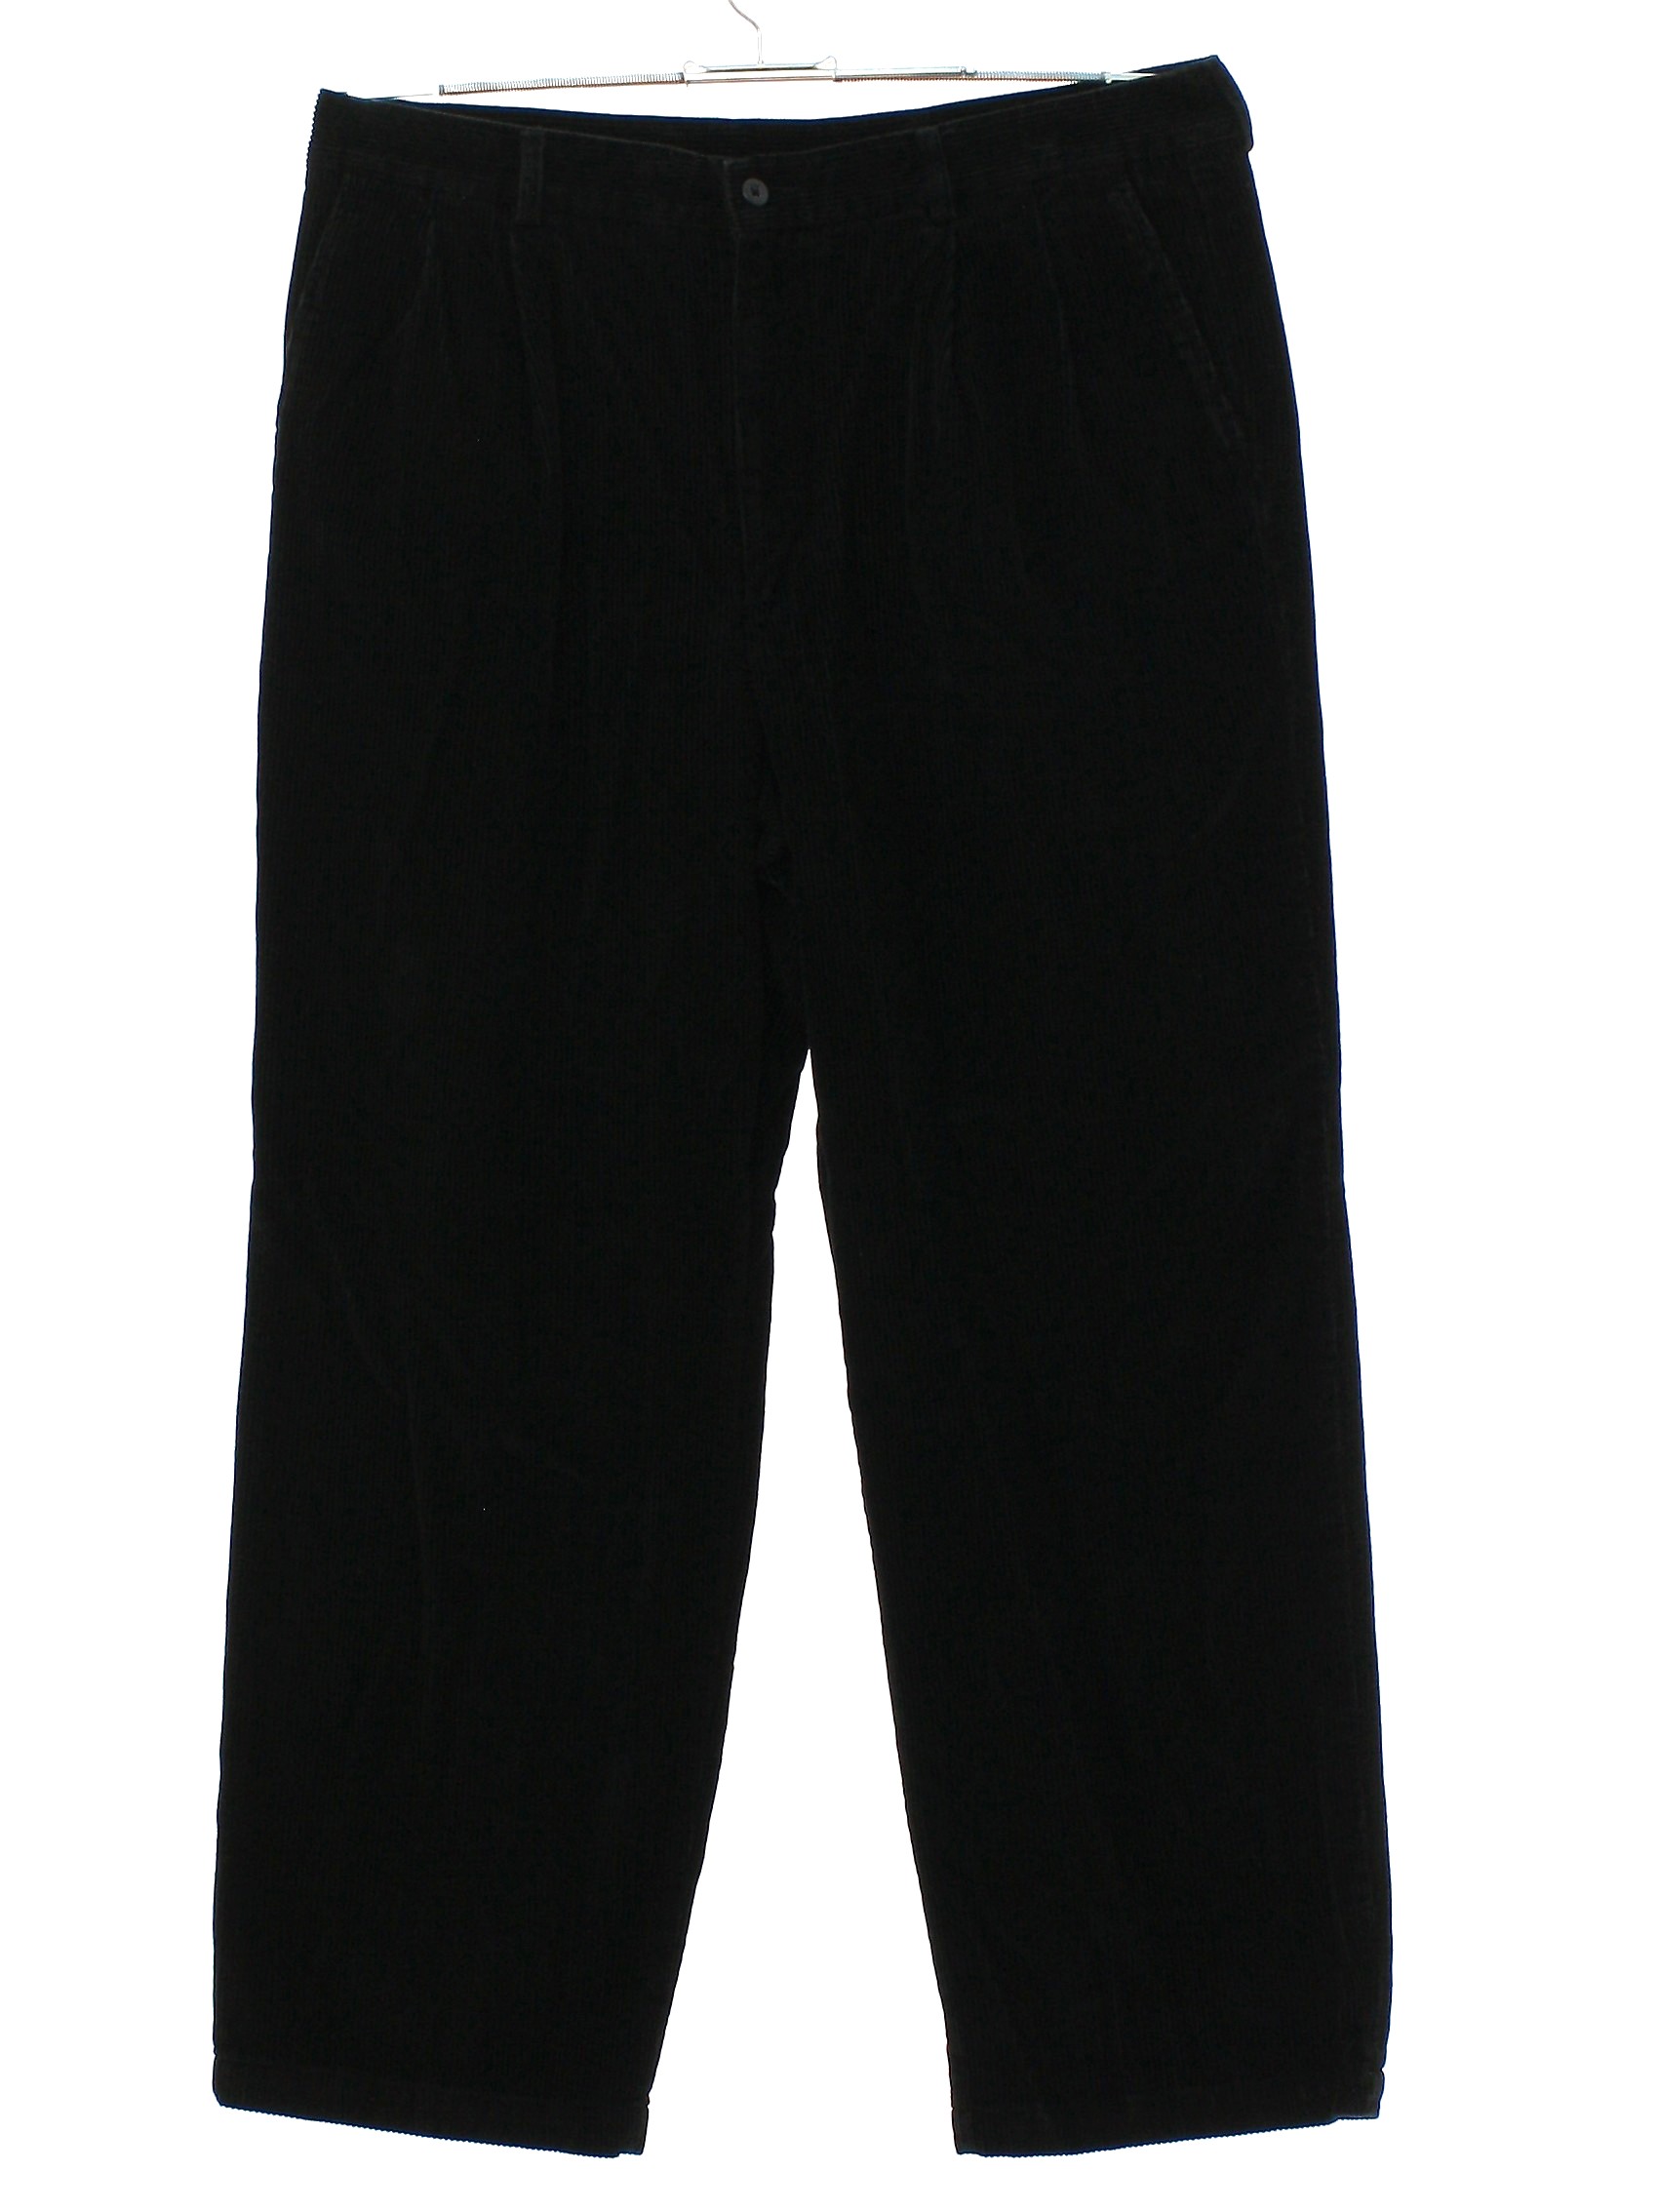 1990s Perry Ellis Cottons Pants: 90s or newer -Perry Ellis Cottons ...